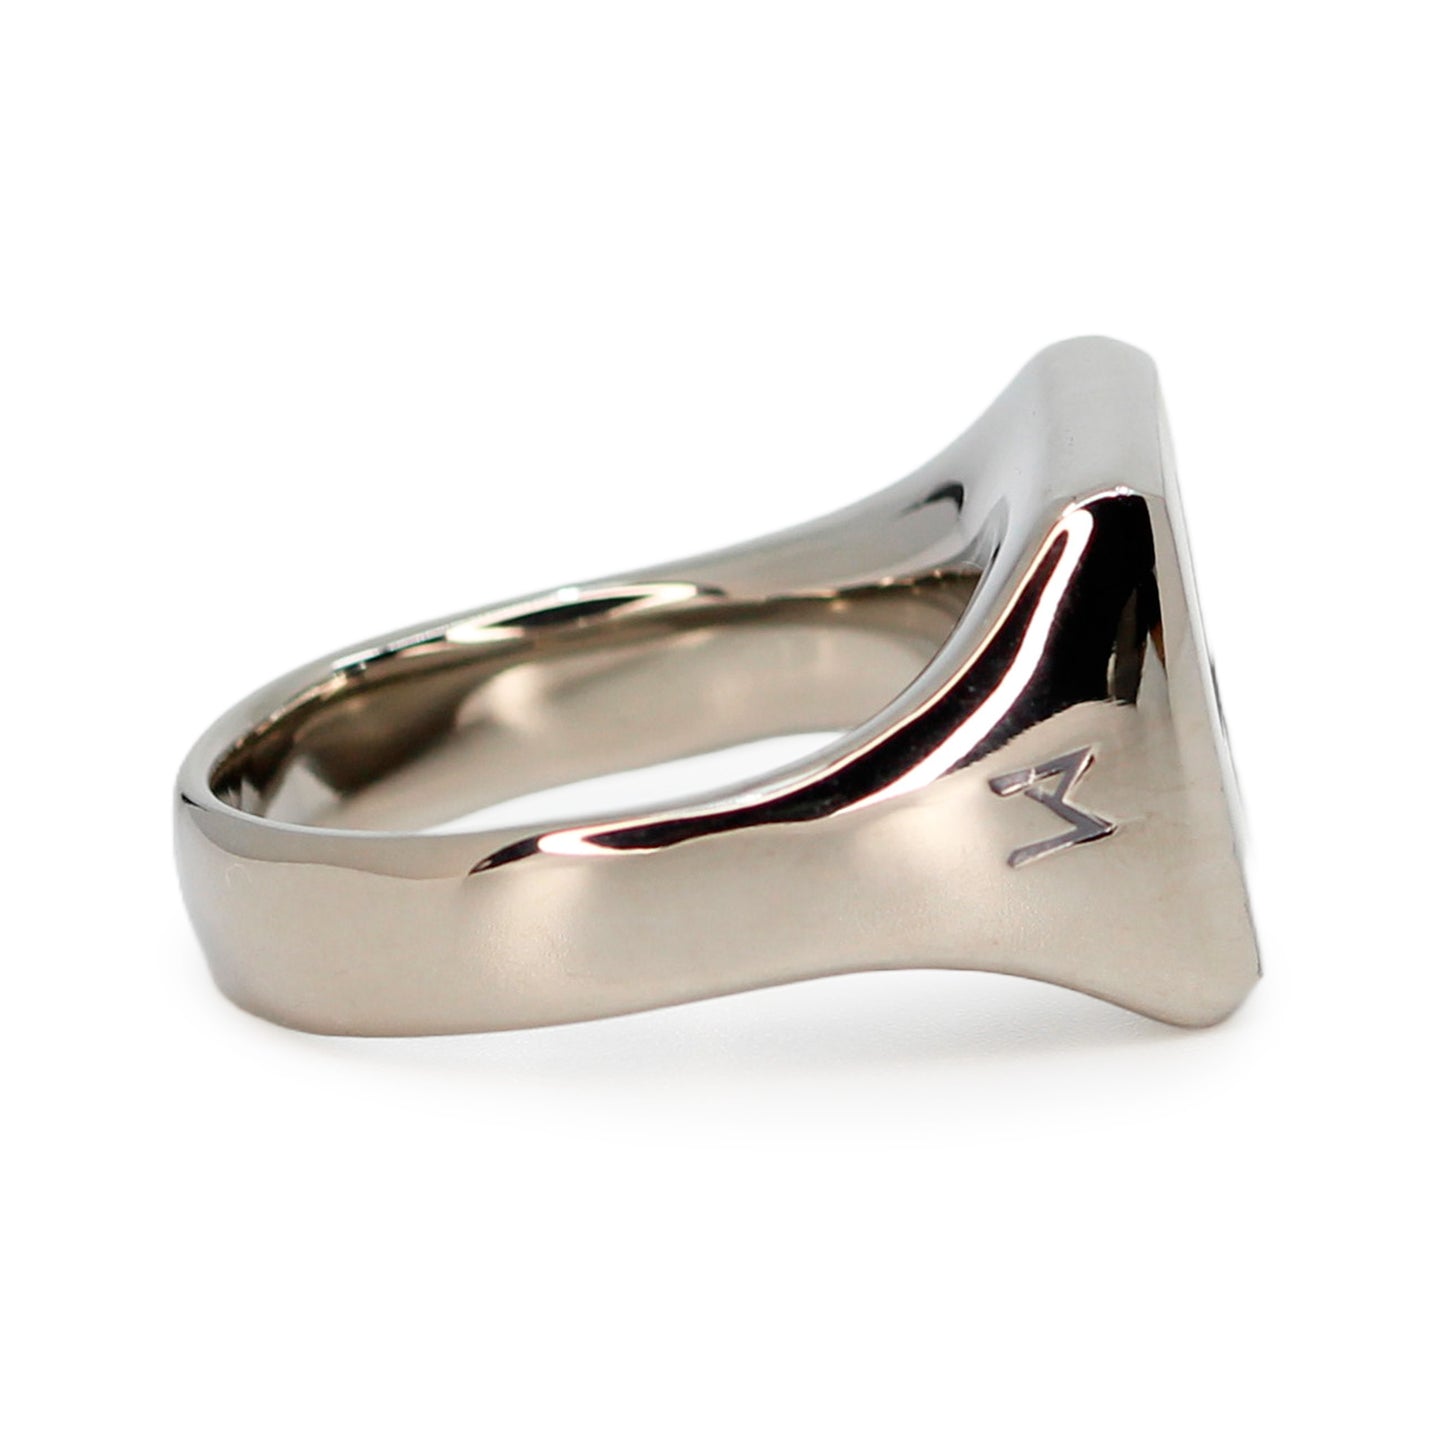 Single silver-colored titanium signet ring, 15x15 mm wide surface with an engraved lightning bolt. Image shows side view of the ring